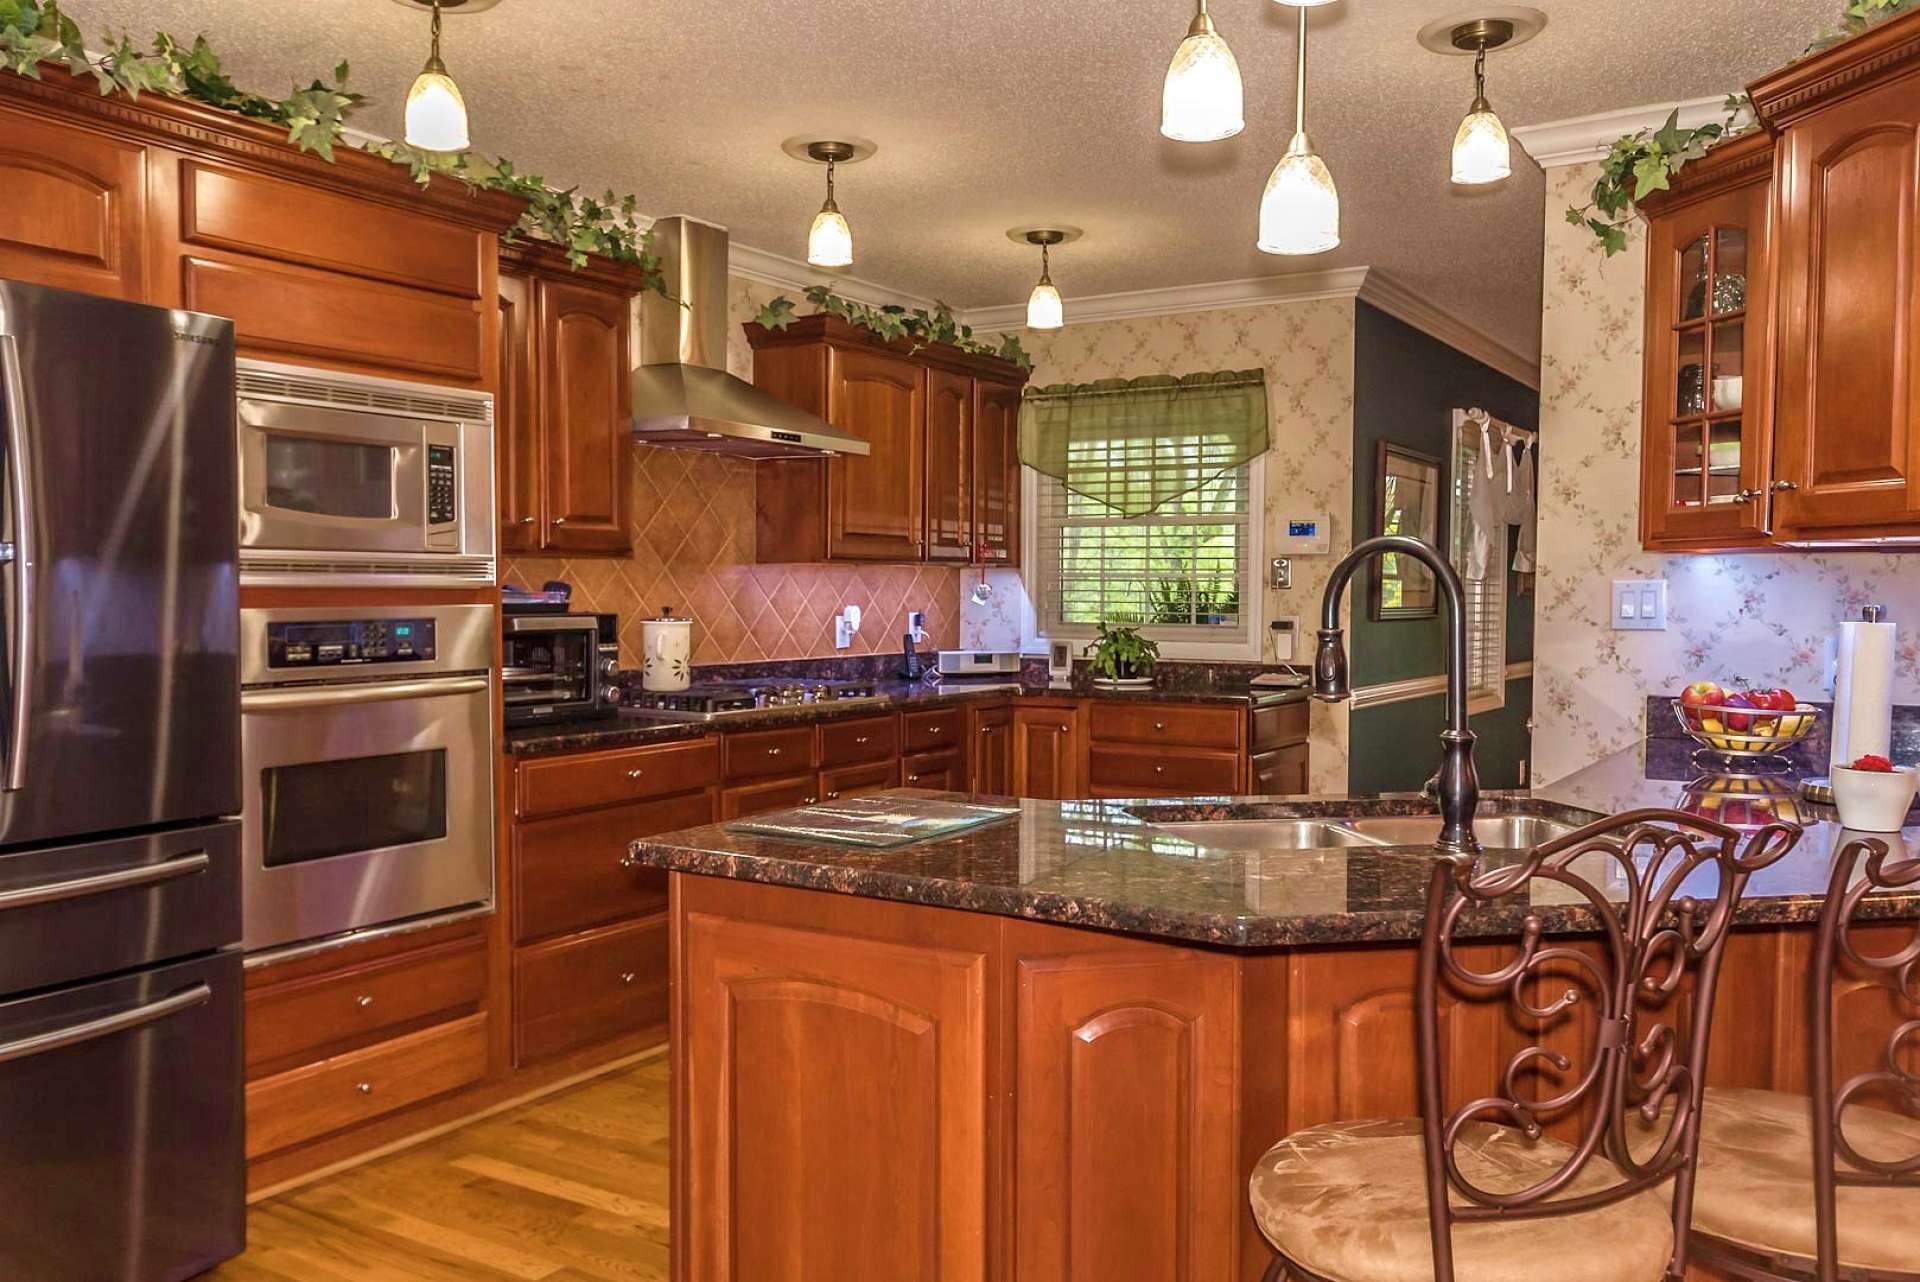 This beautiful gourmet kitchen features stainless appliances including gas cooktop, granite countertops, and plenty of work and storage space that includes a bar with seating.